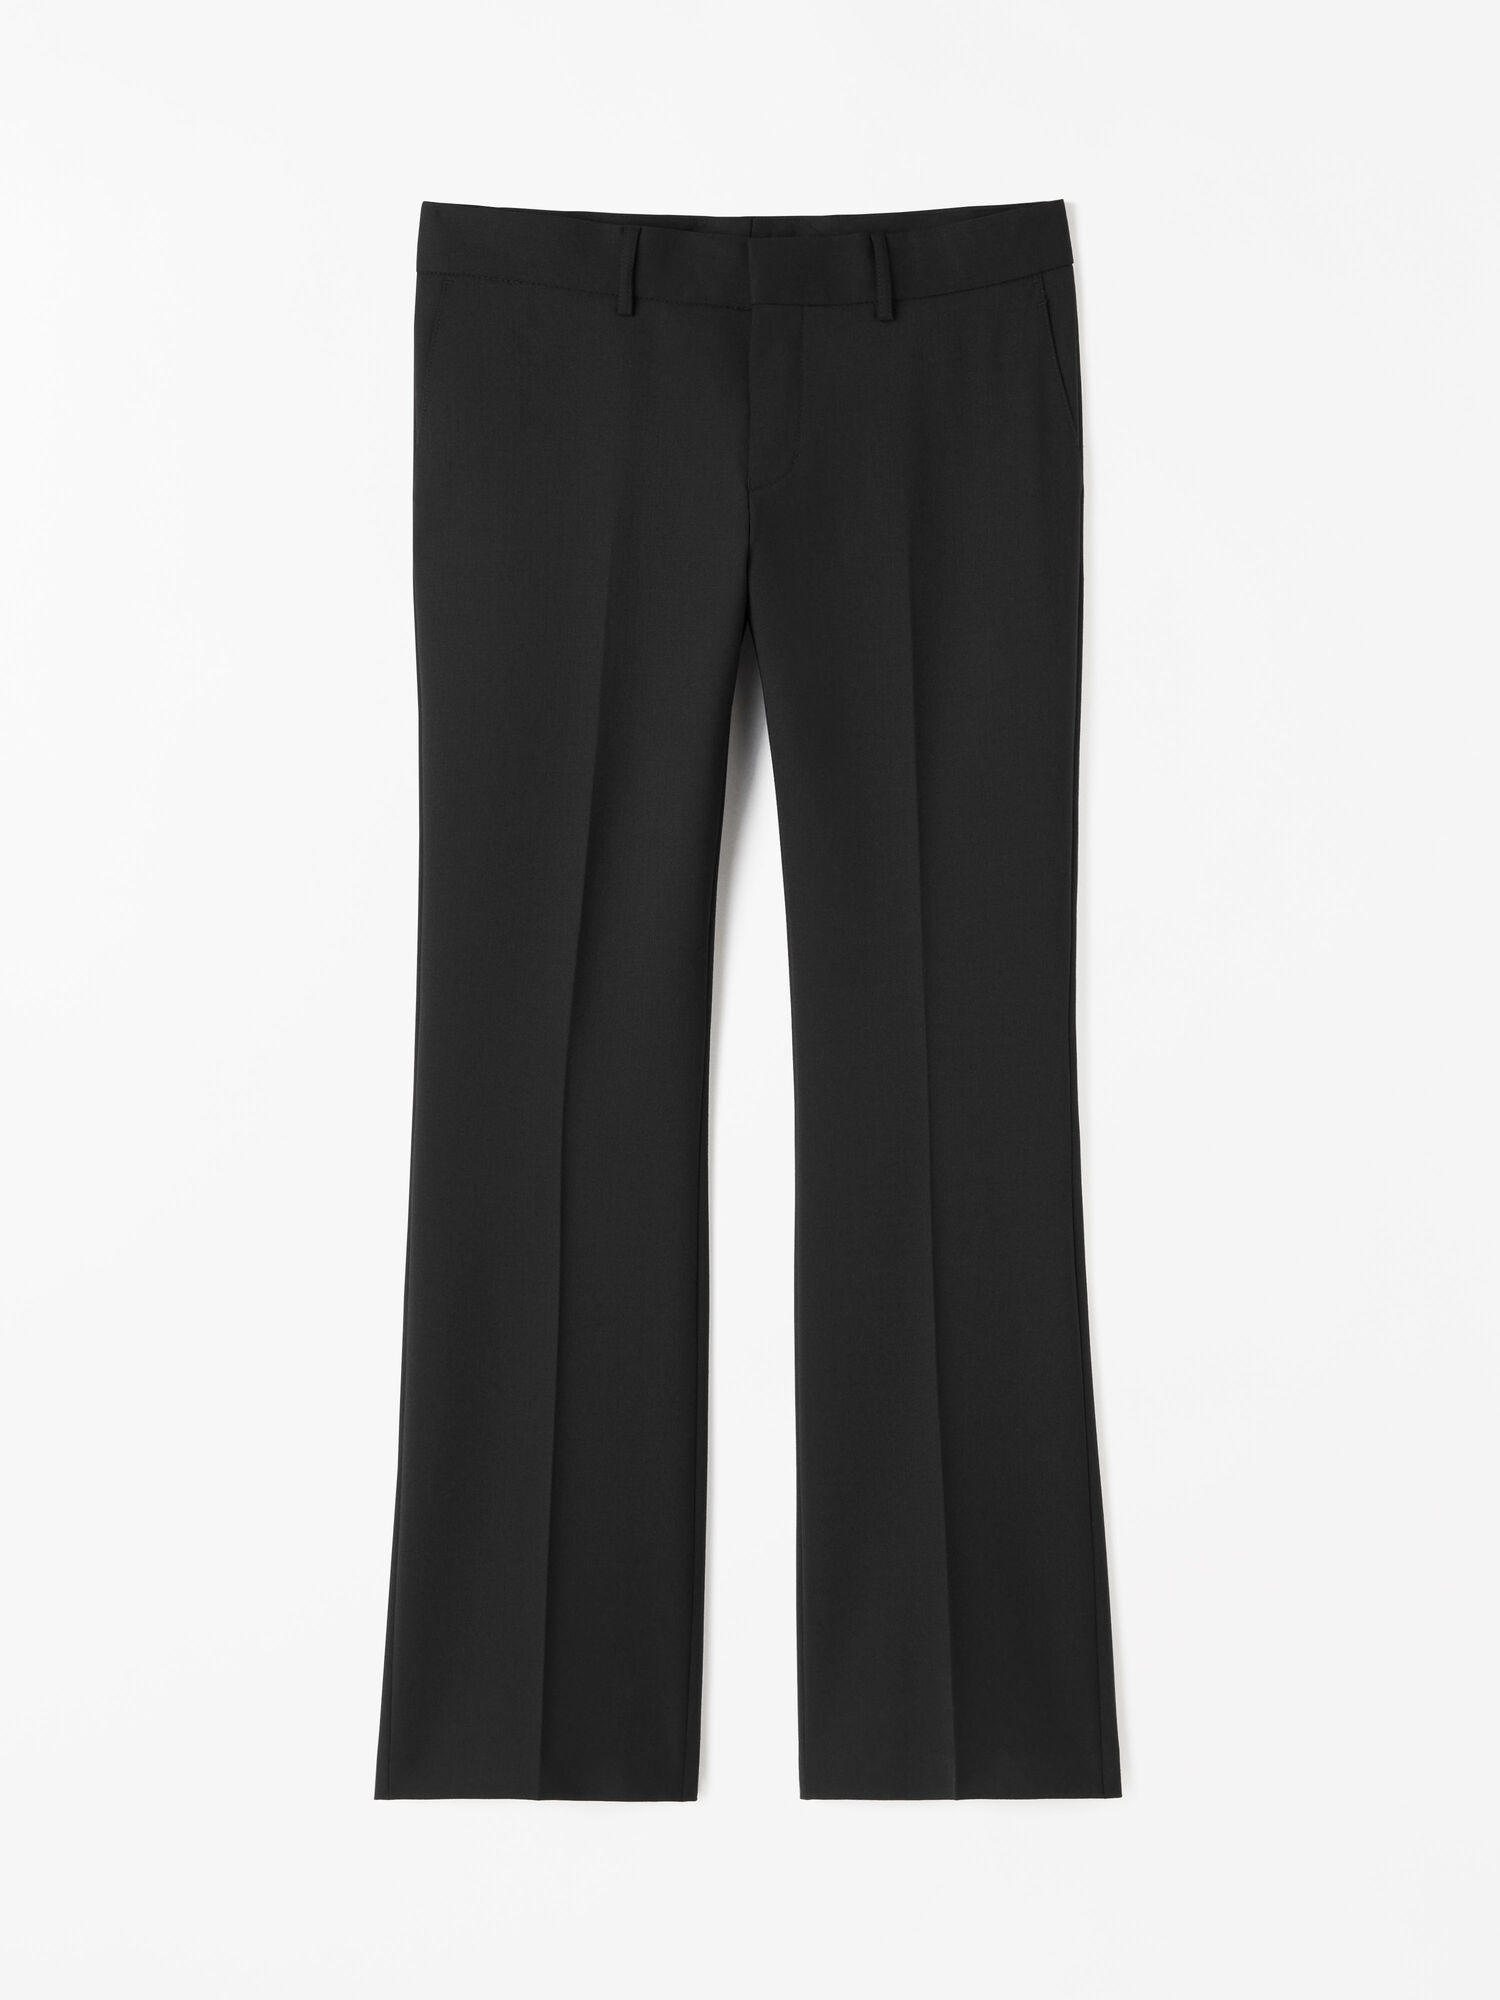 Trae Trousers